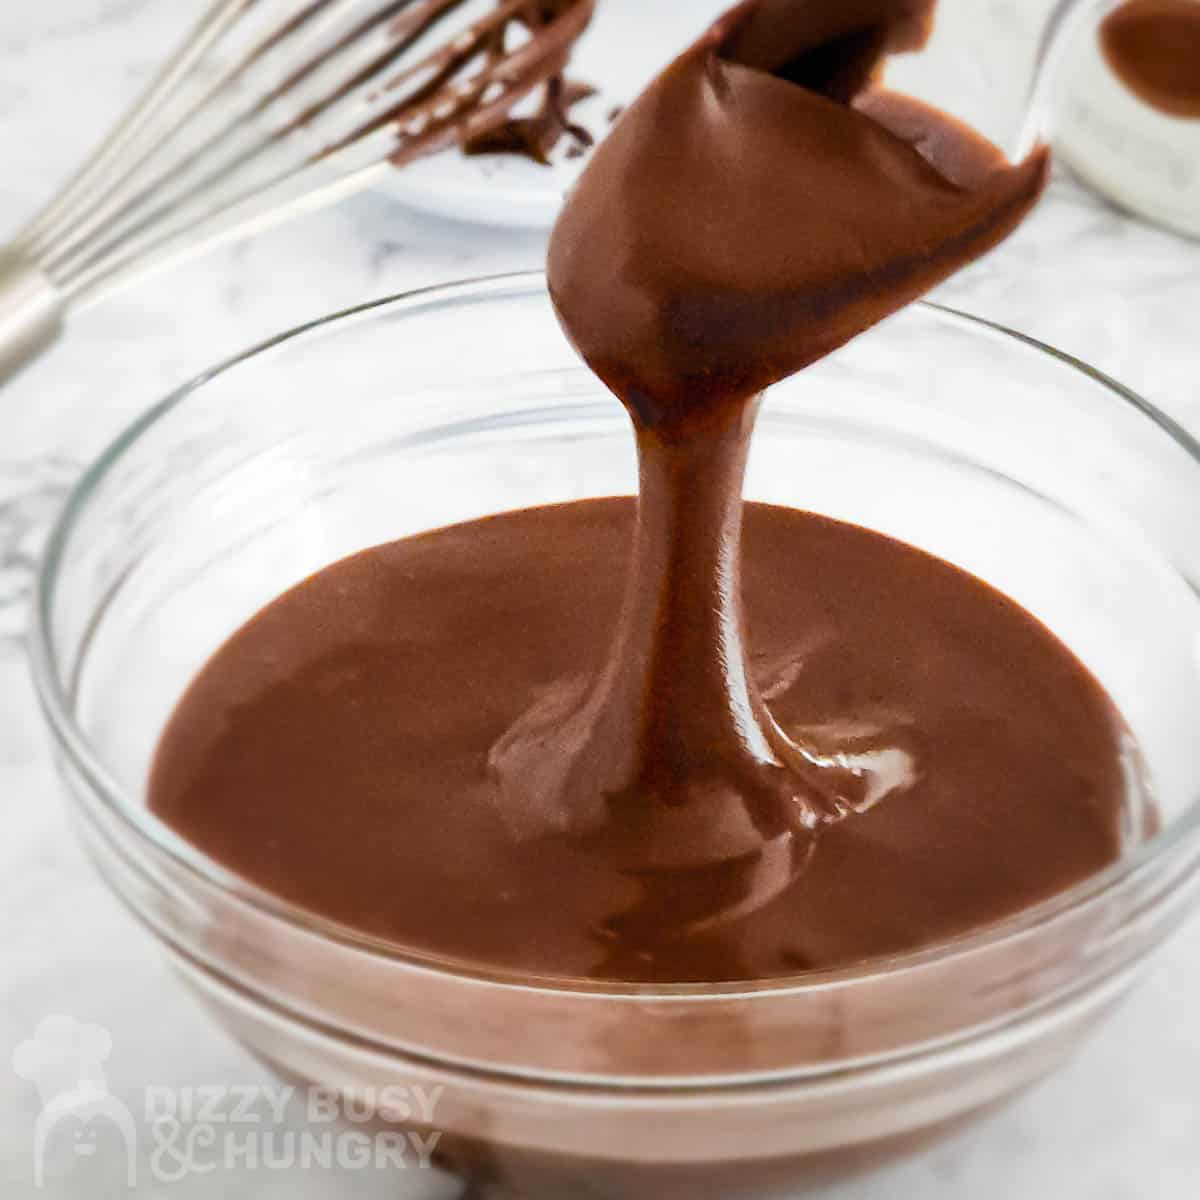 Side shot of chocolate glaze being drizzled in a clear bowl full of it with a whisk in the background.